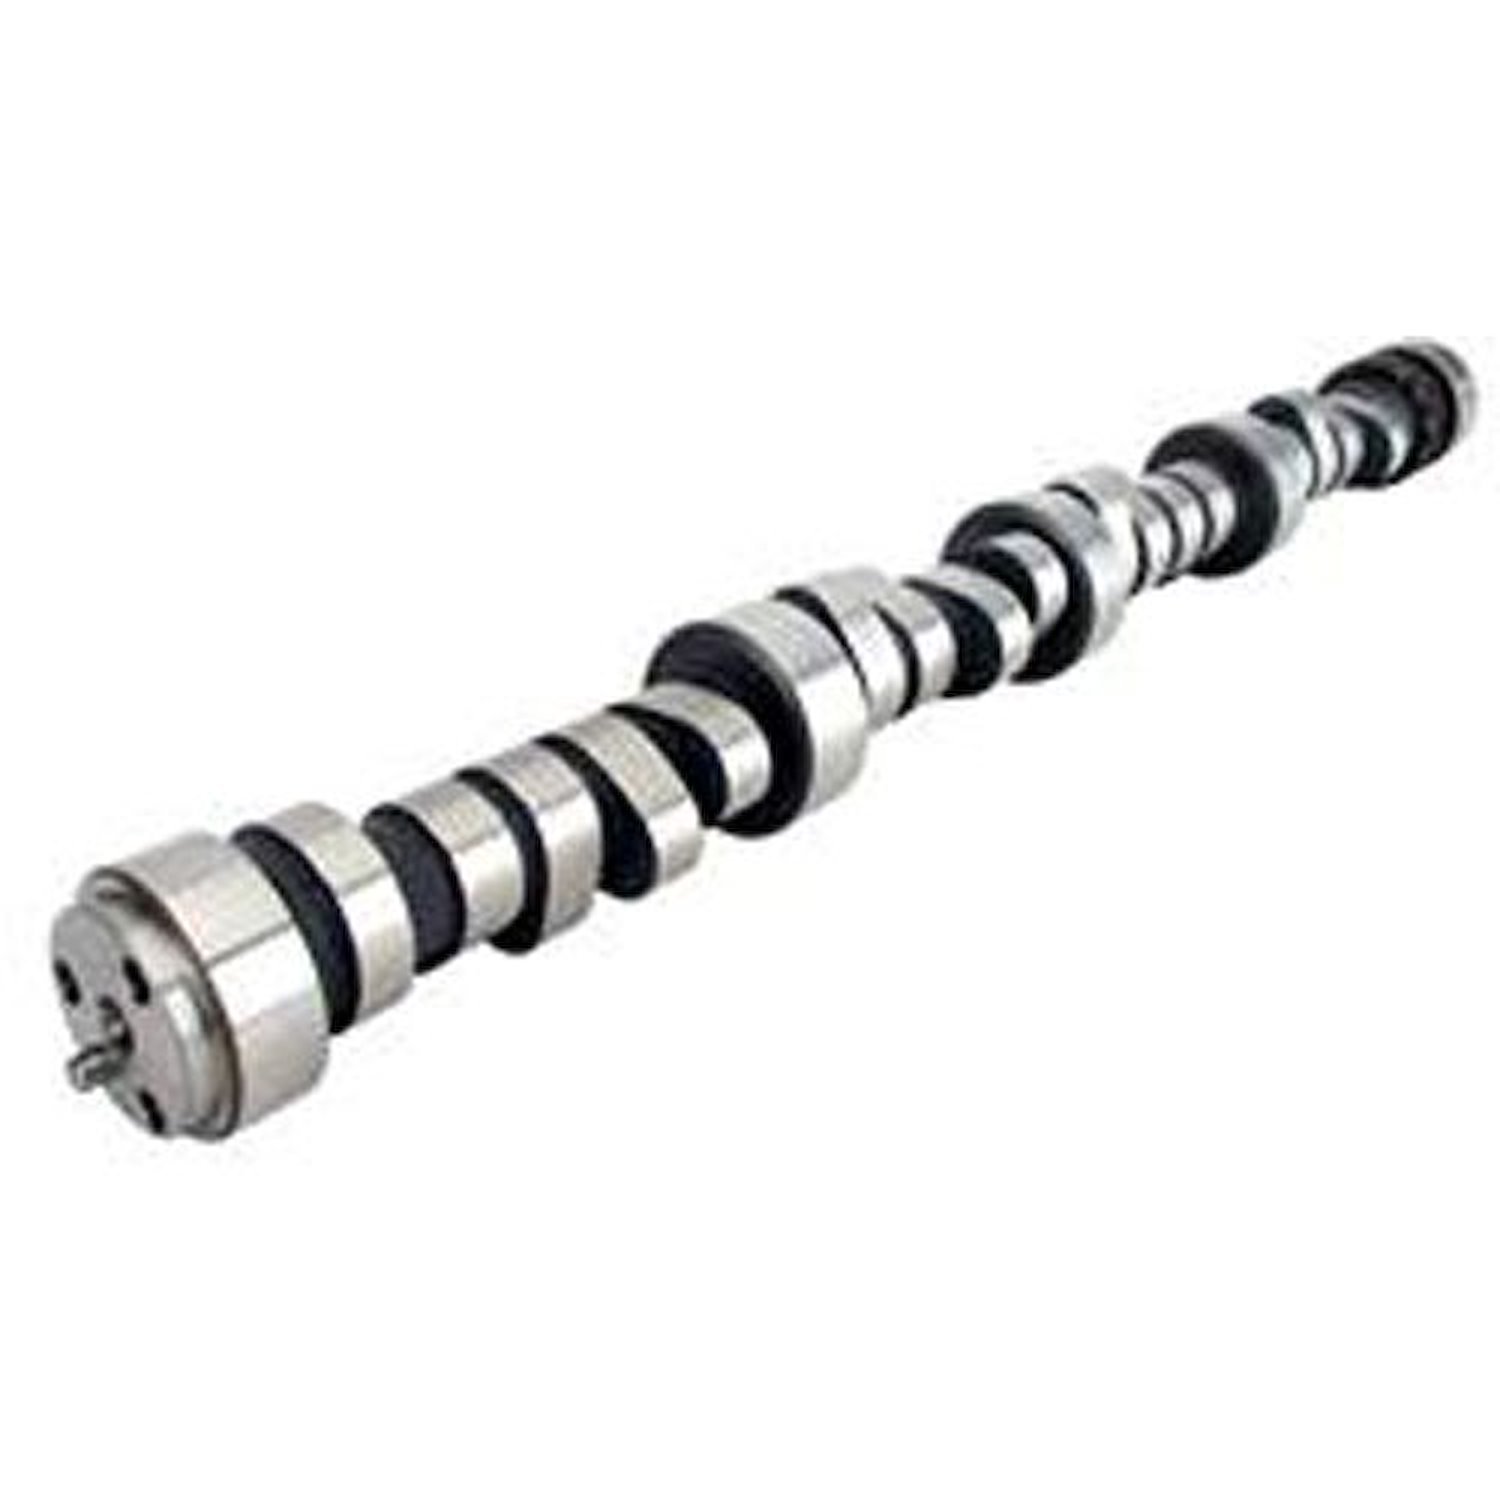 Big Mutha Thumpr Hydraulic Roller Camshaft Complete Kit Lift: .552"/.537"